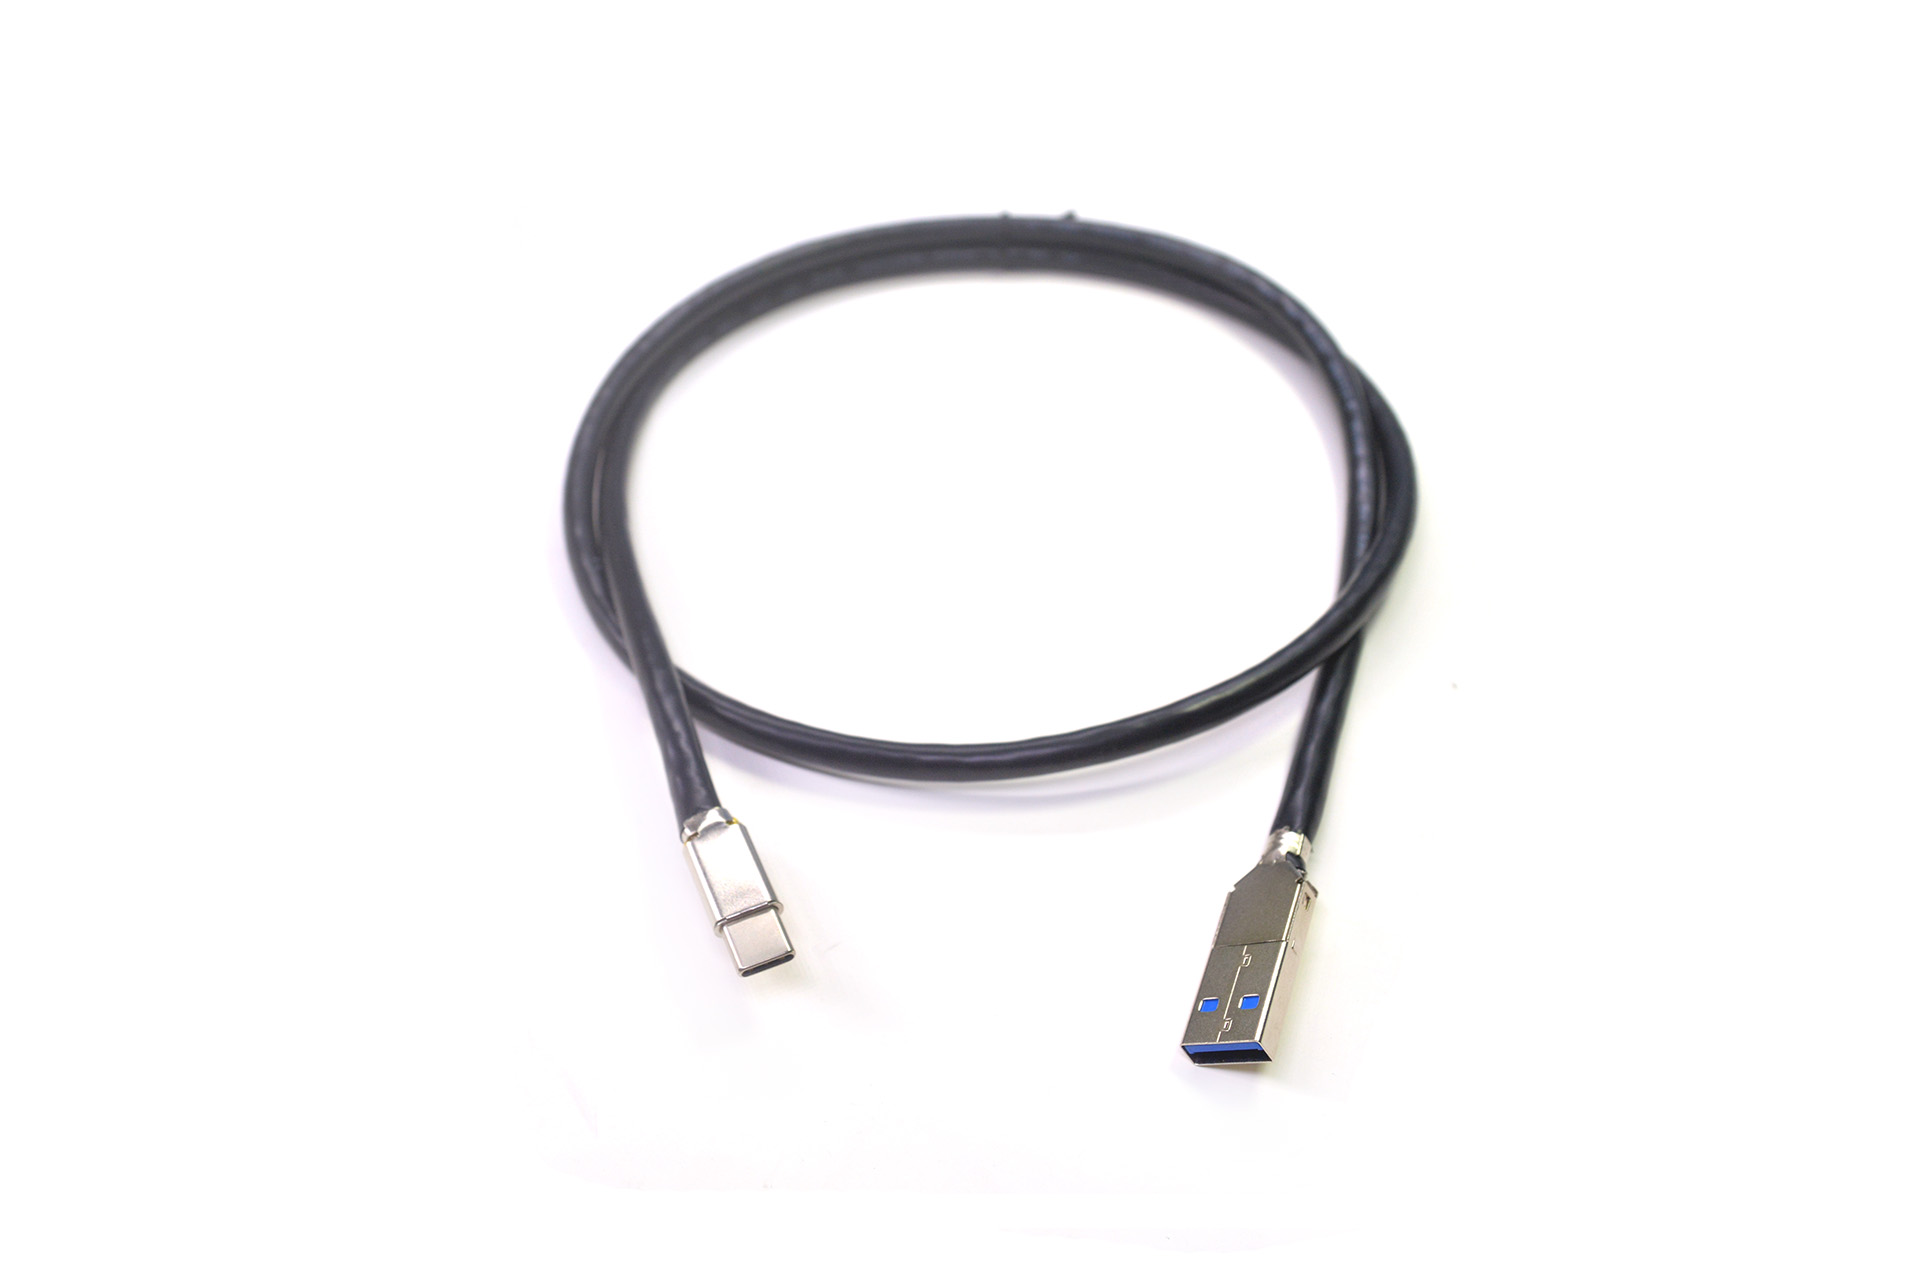 USB3 Type-A to Type-C Non-over-mold cable